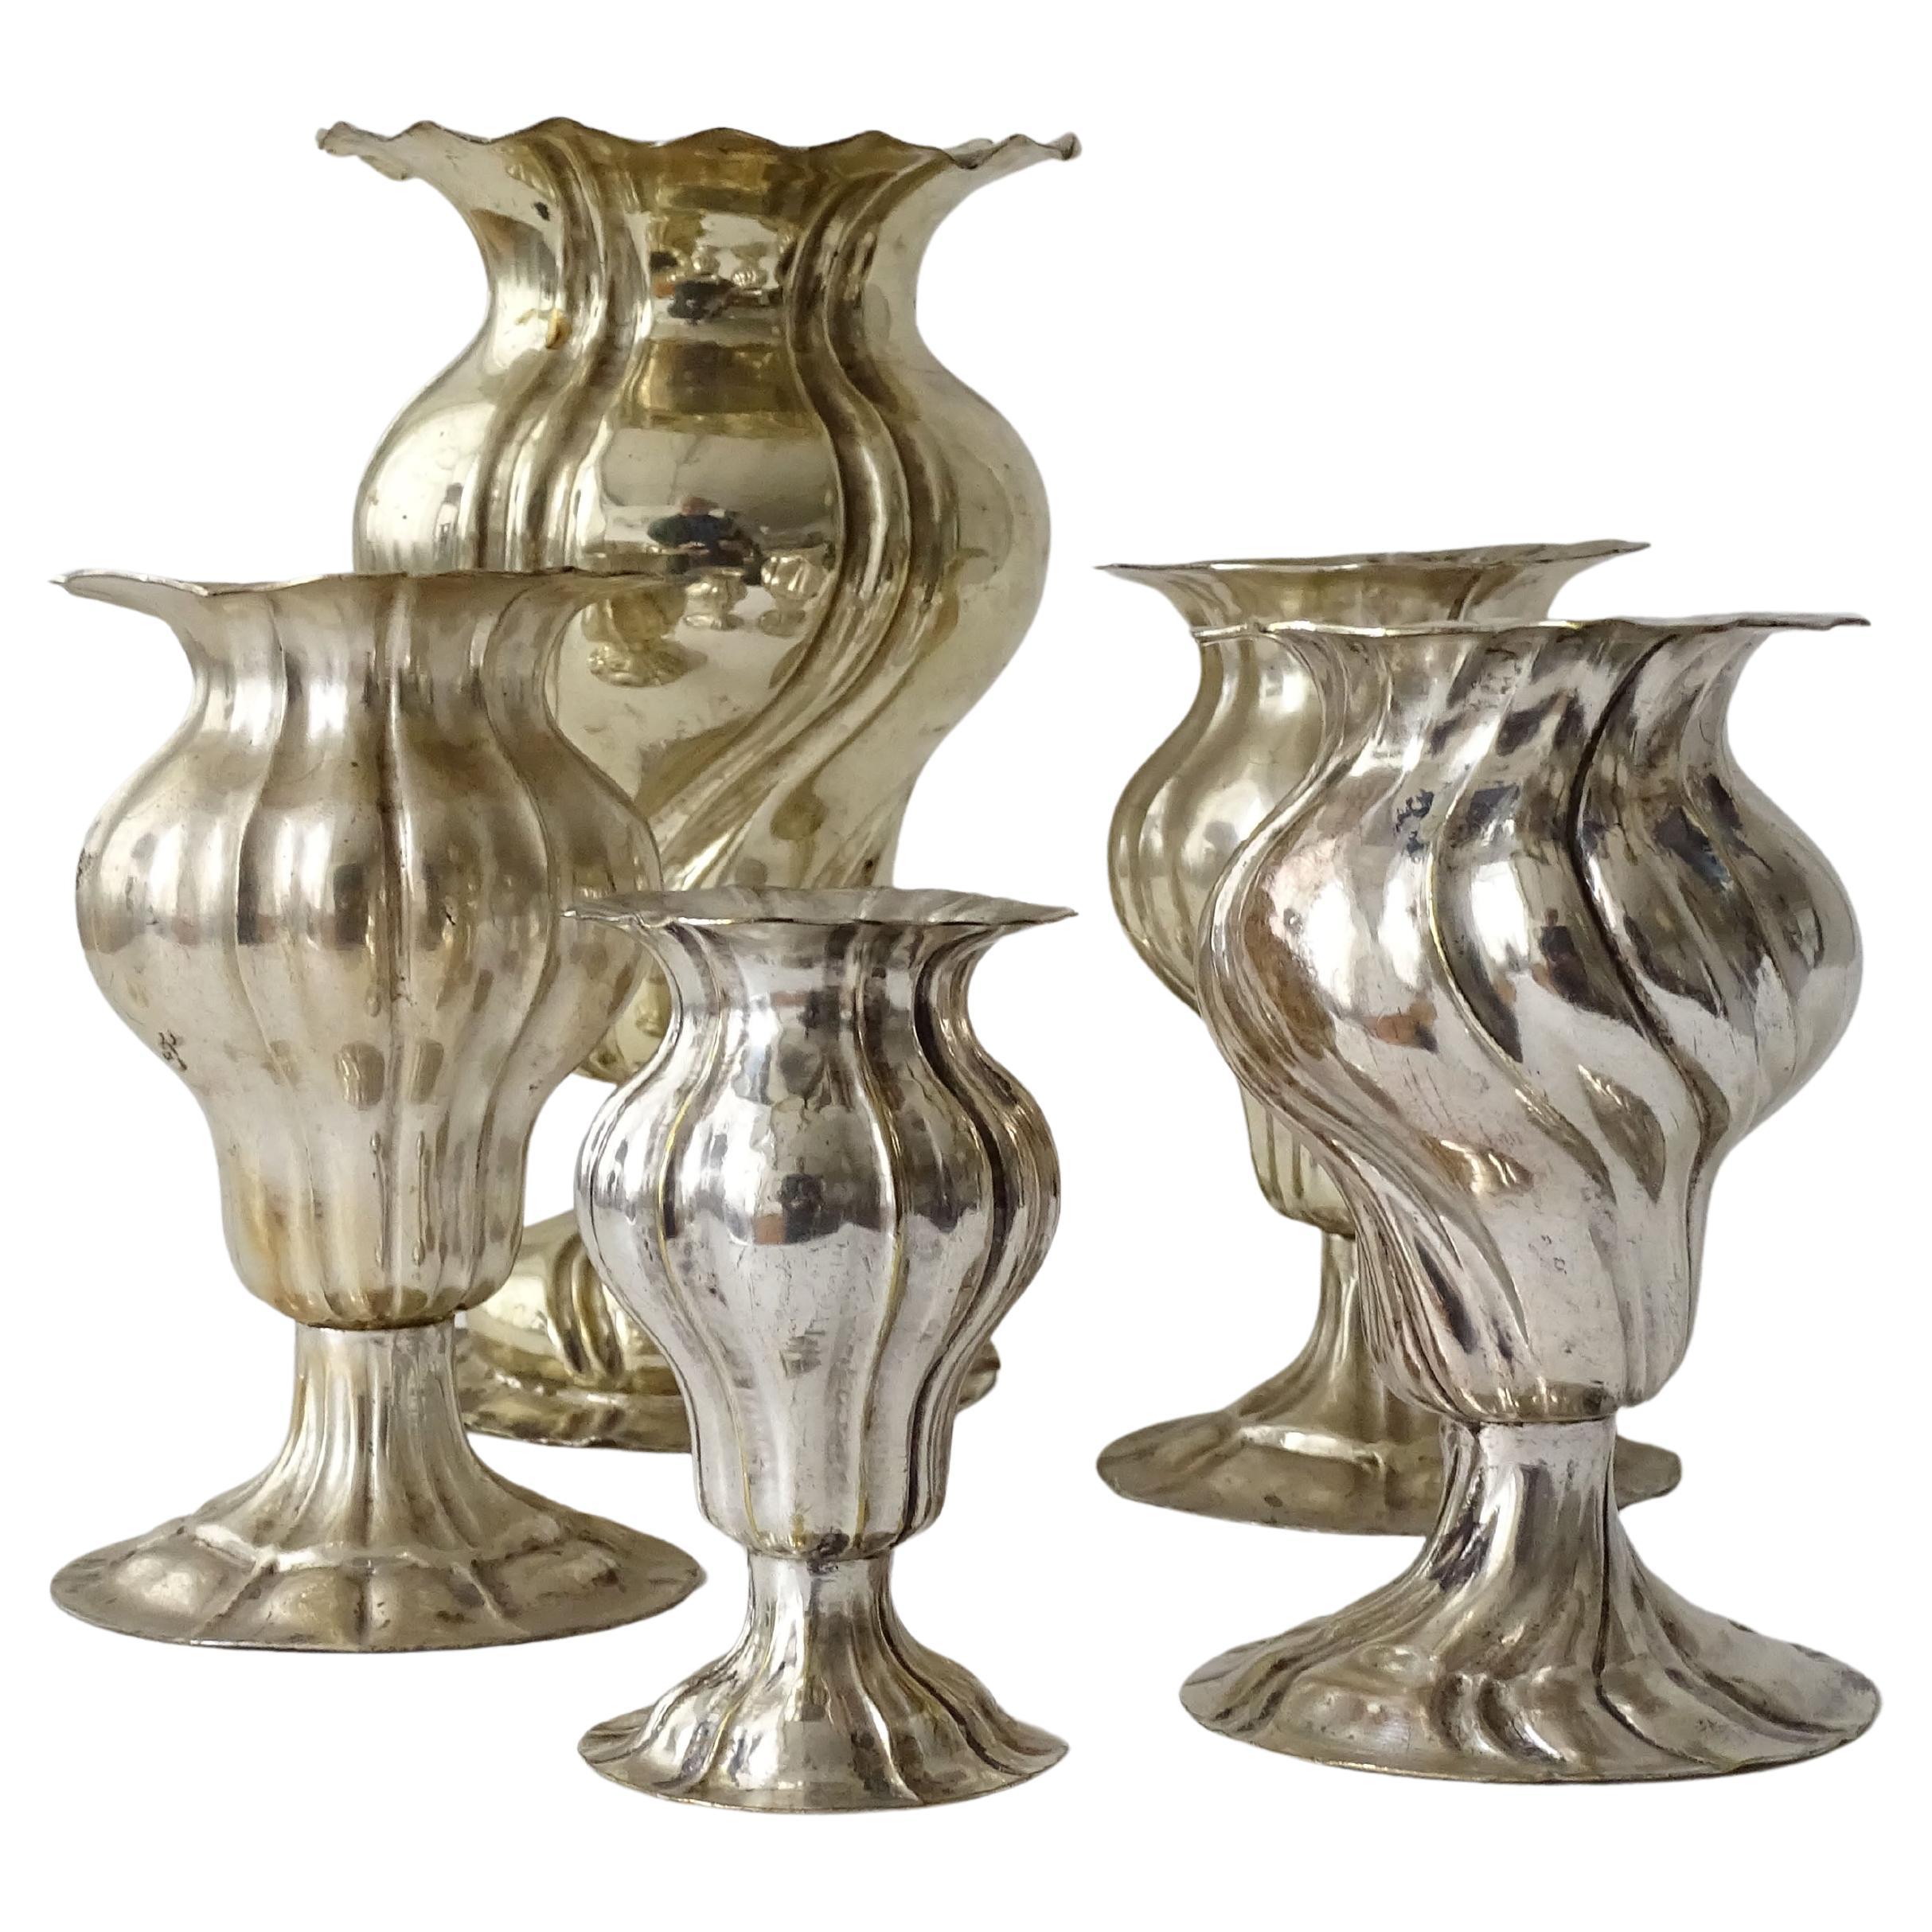 Five Small Antique Silverplate Swirling Soliflor Vases, Italy 1920s